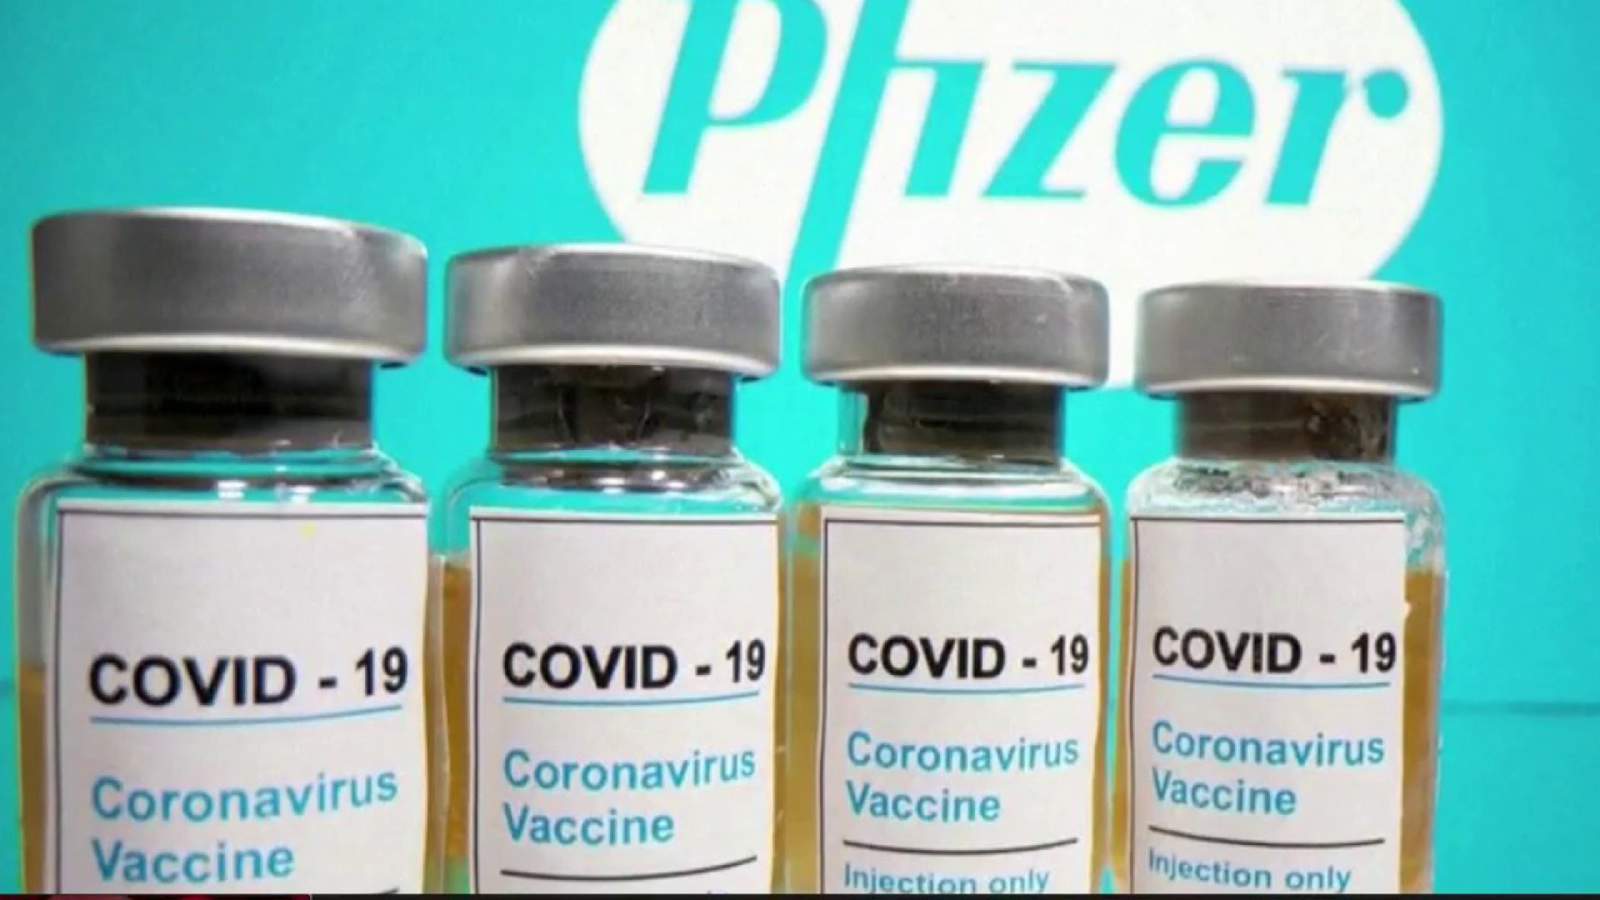 Two San Antonio city council members call for ‘equitable’ approach in COVID-19 vaccinations